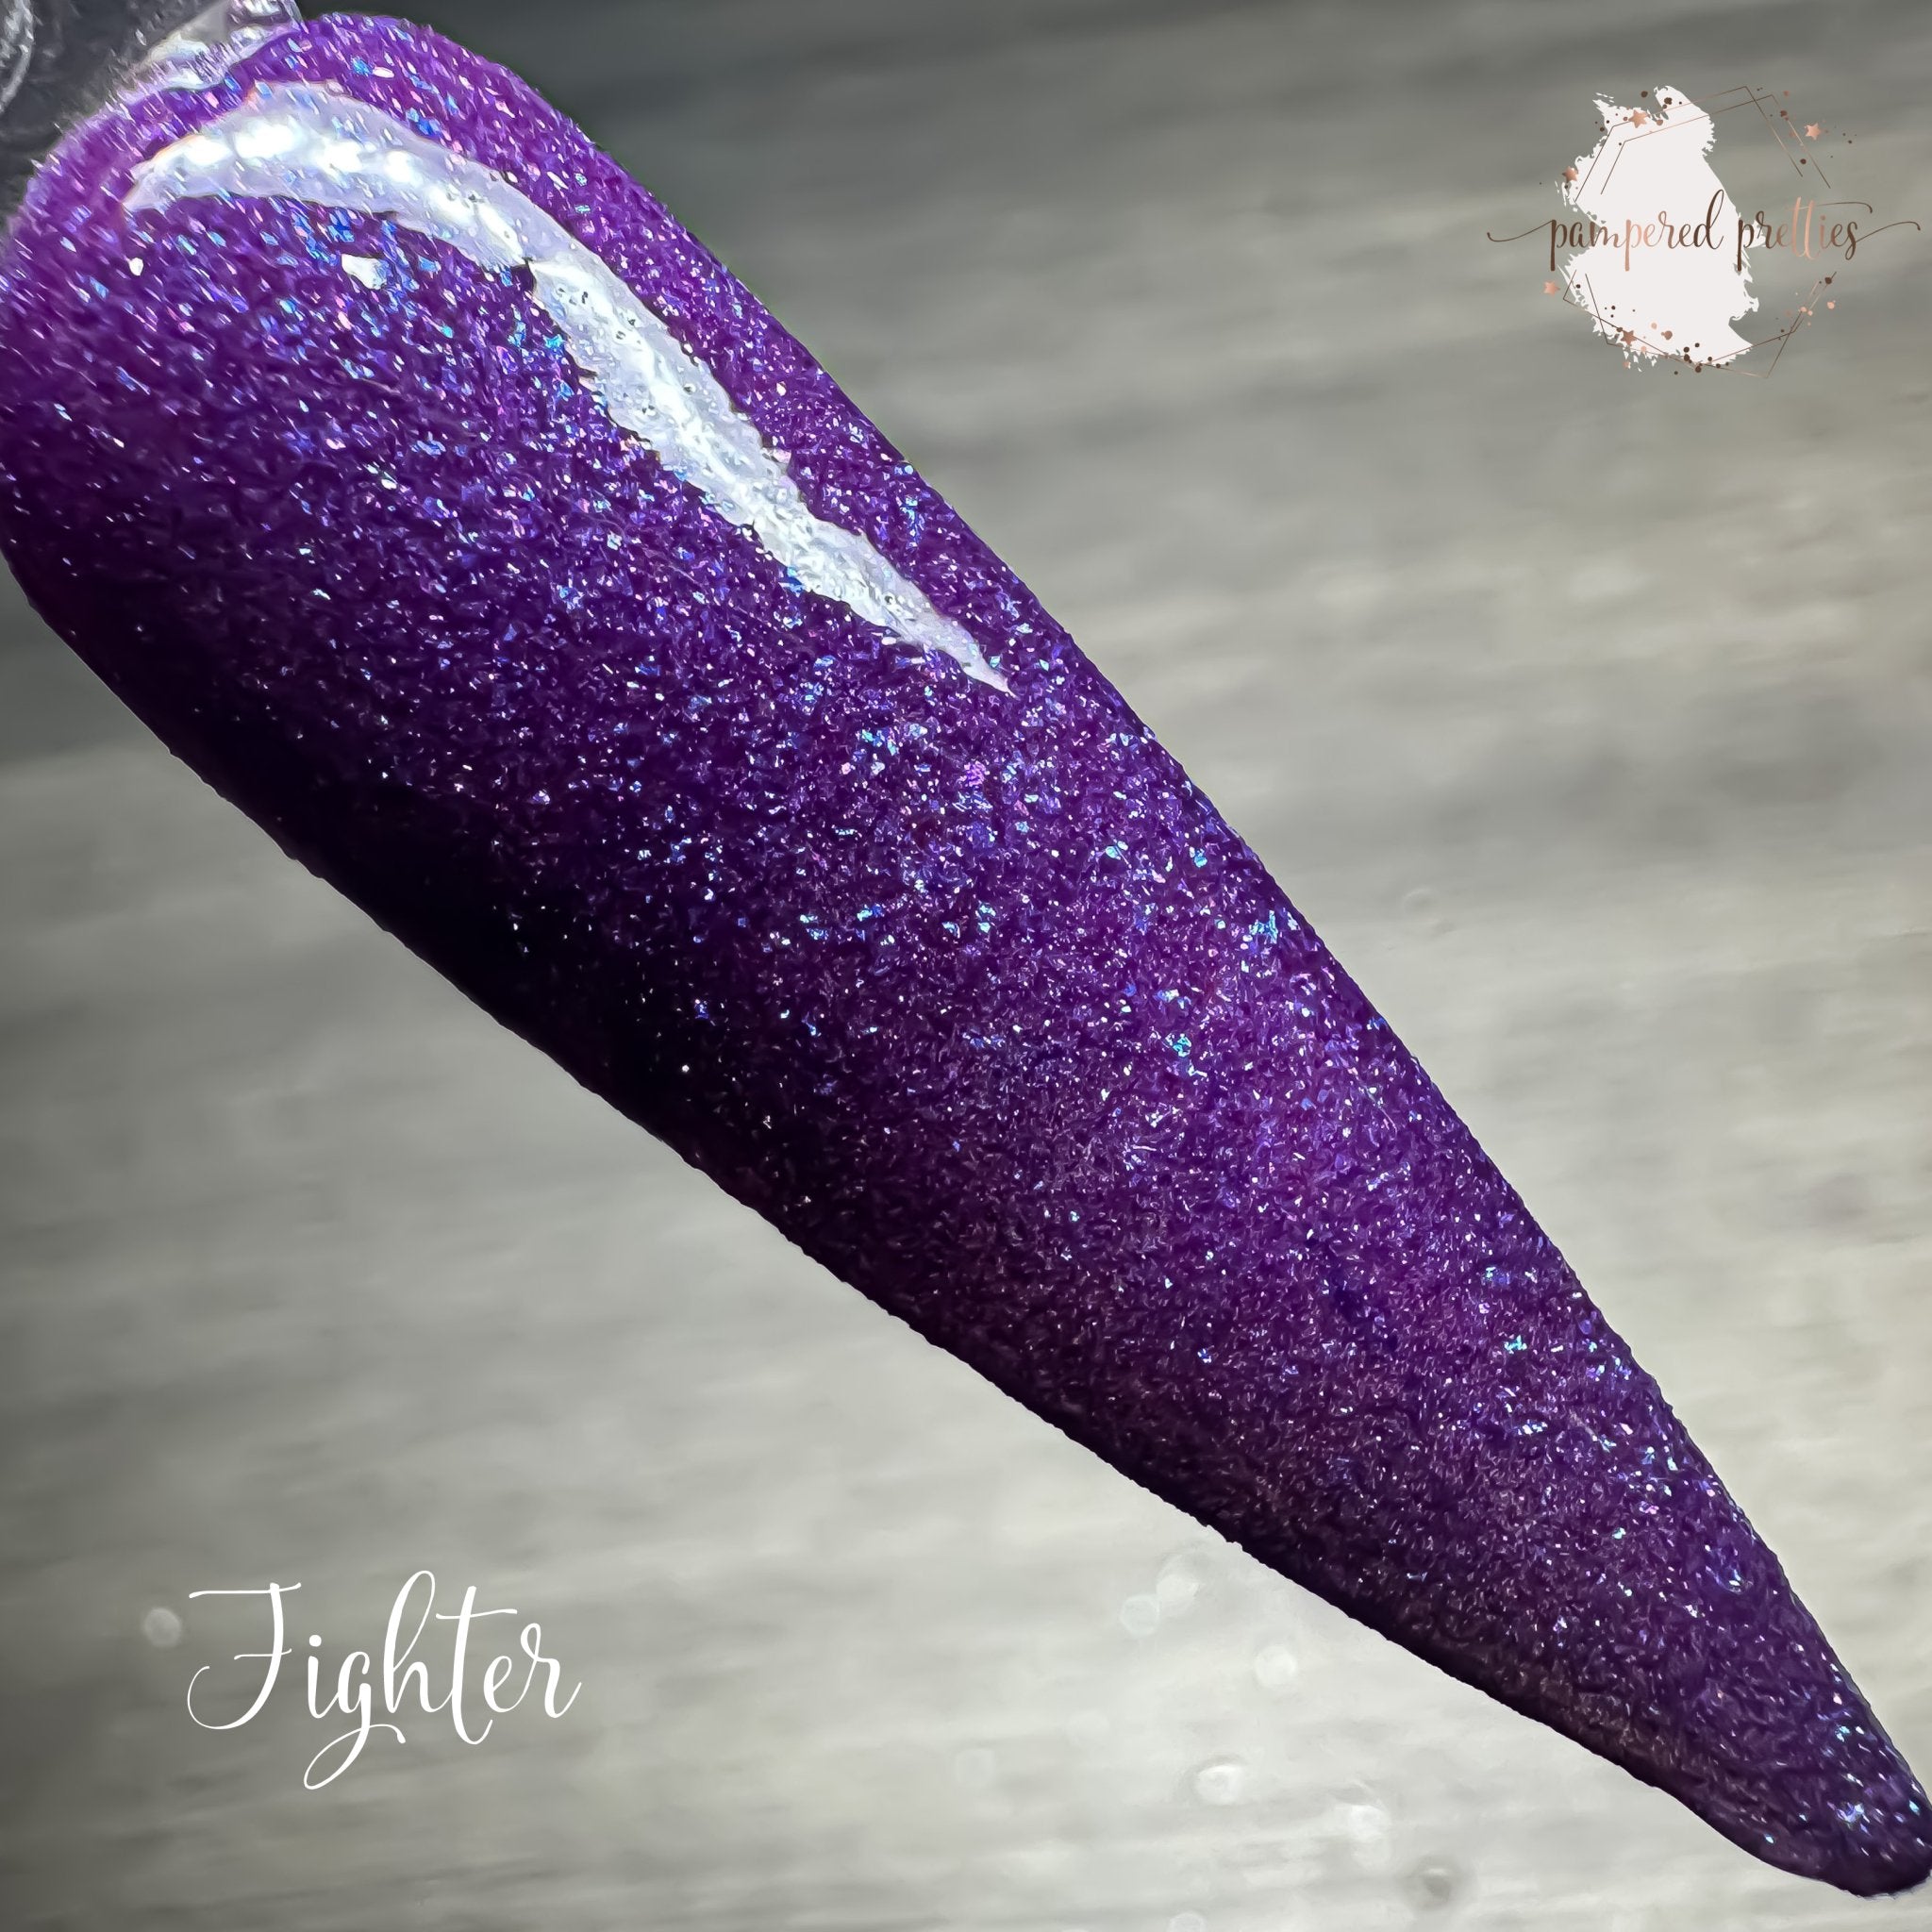 Fighter (Domestic Violence Awareness) - Pampered Pretties